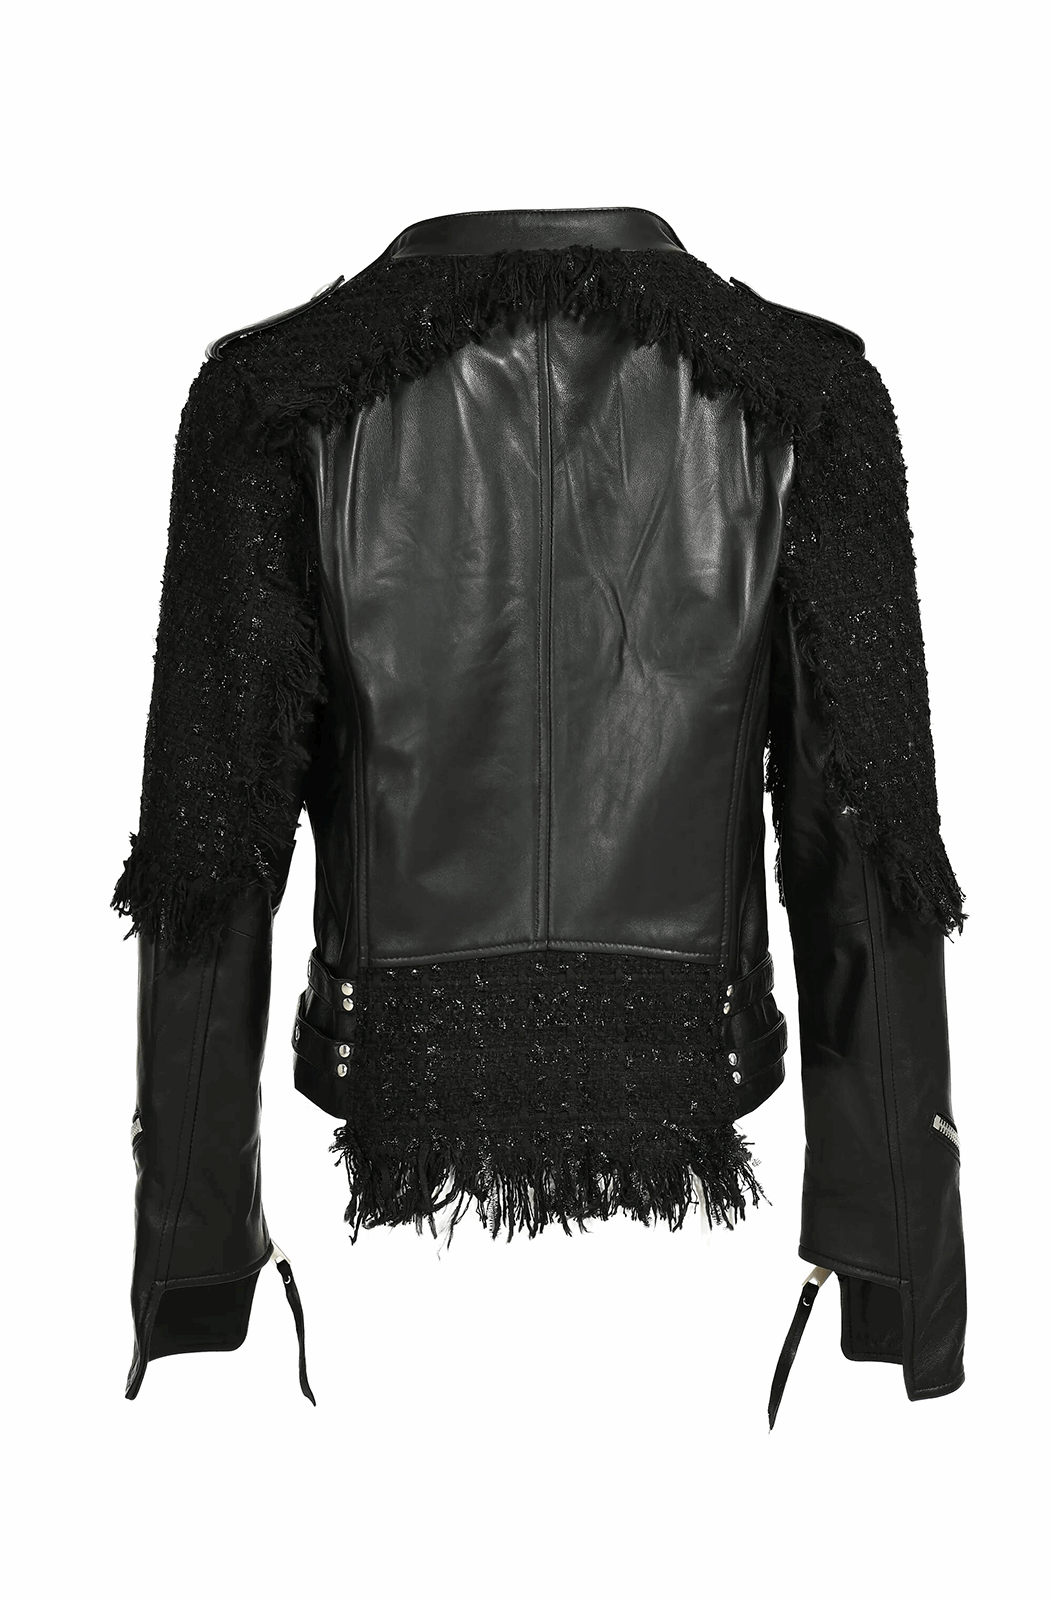 Real leather biker jacket with tweed patchwork